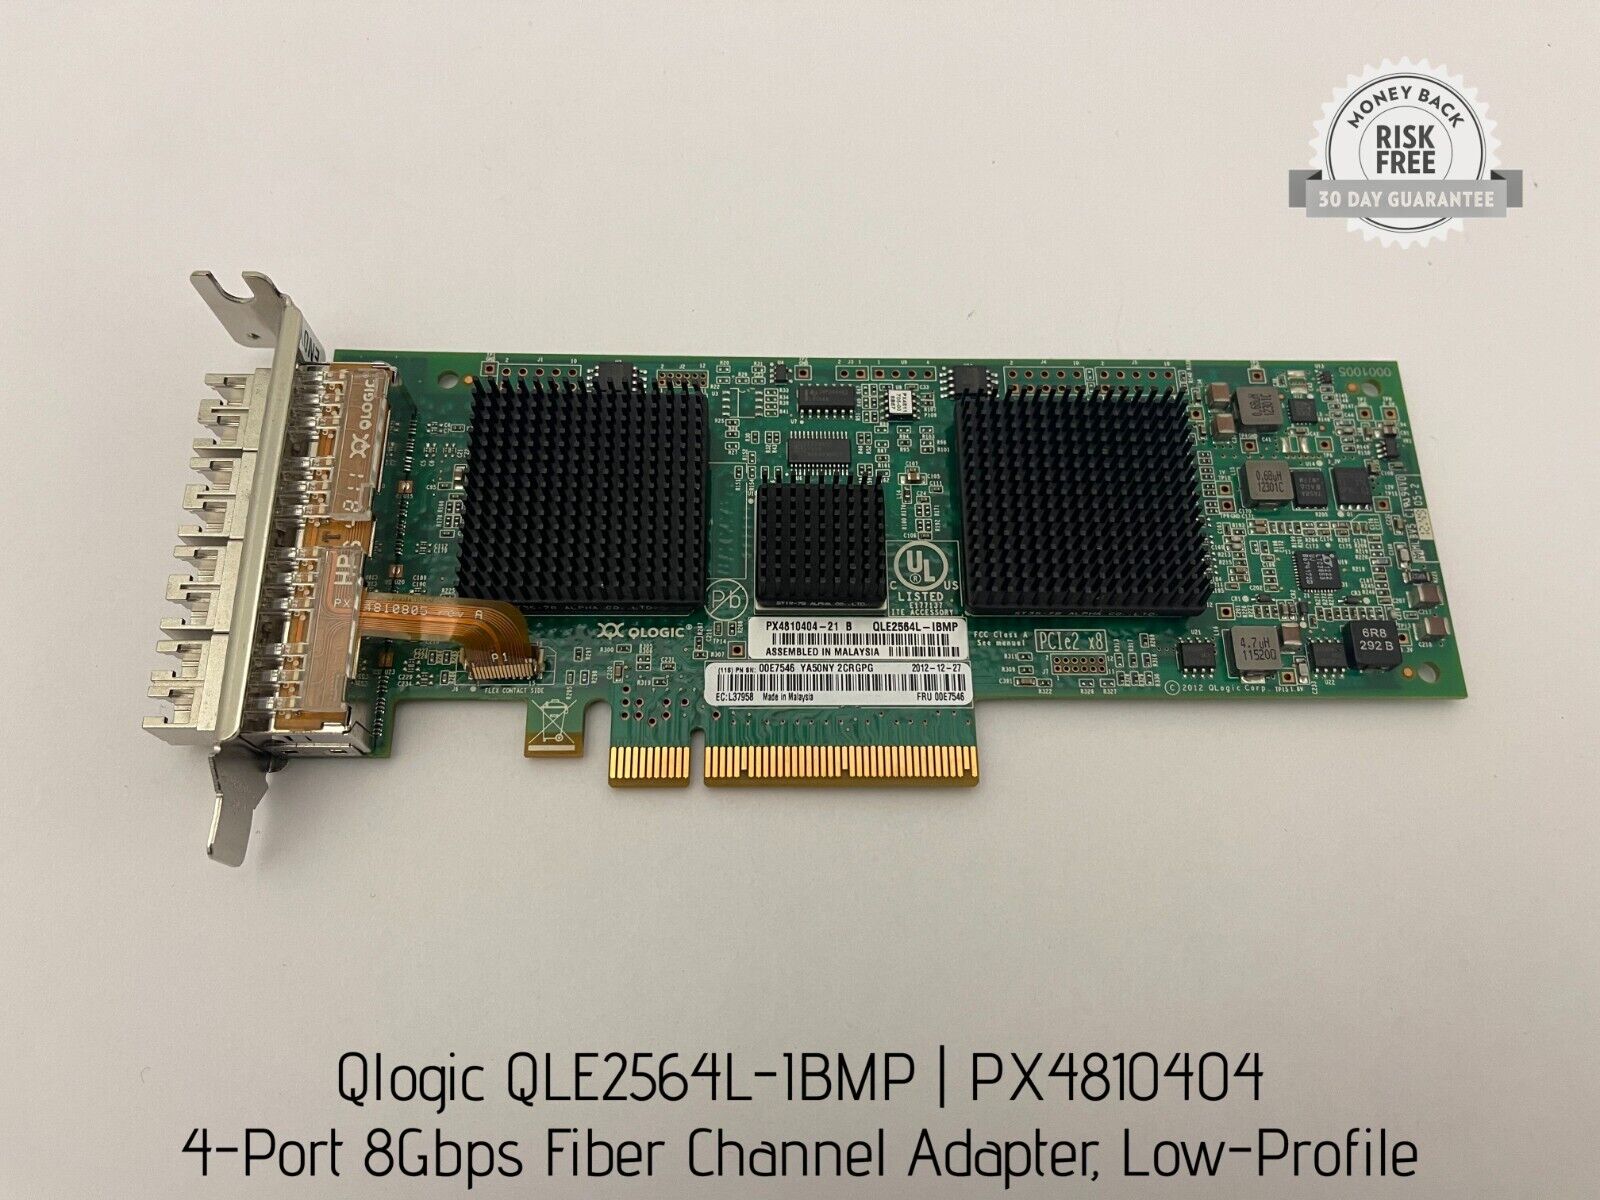 Qlogic QLE2564L-IBMP 4-Port 8Gbps Fiber Channel Adapter, PX4810404 Low-Profile